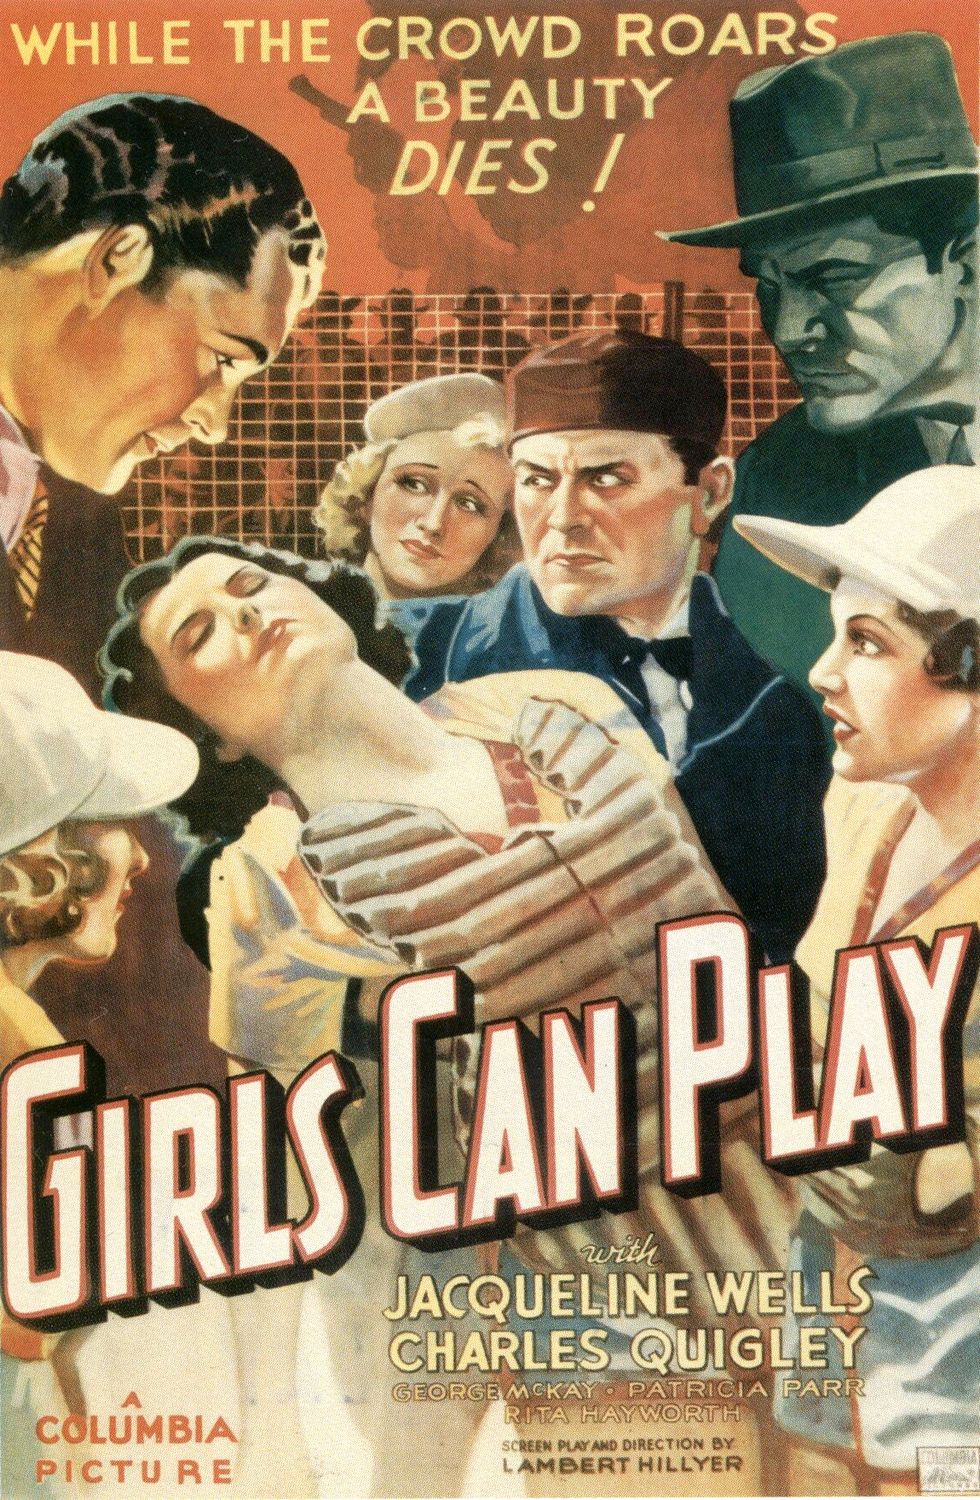 Extra Large Movie Poster Image for Girls Can Play 